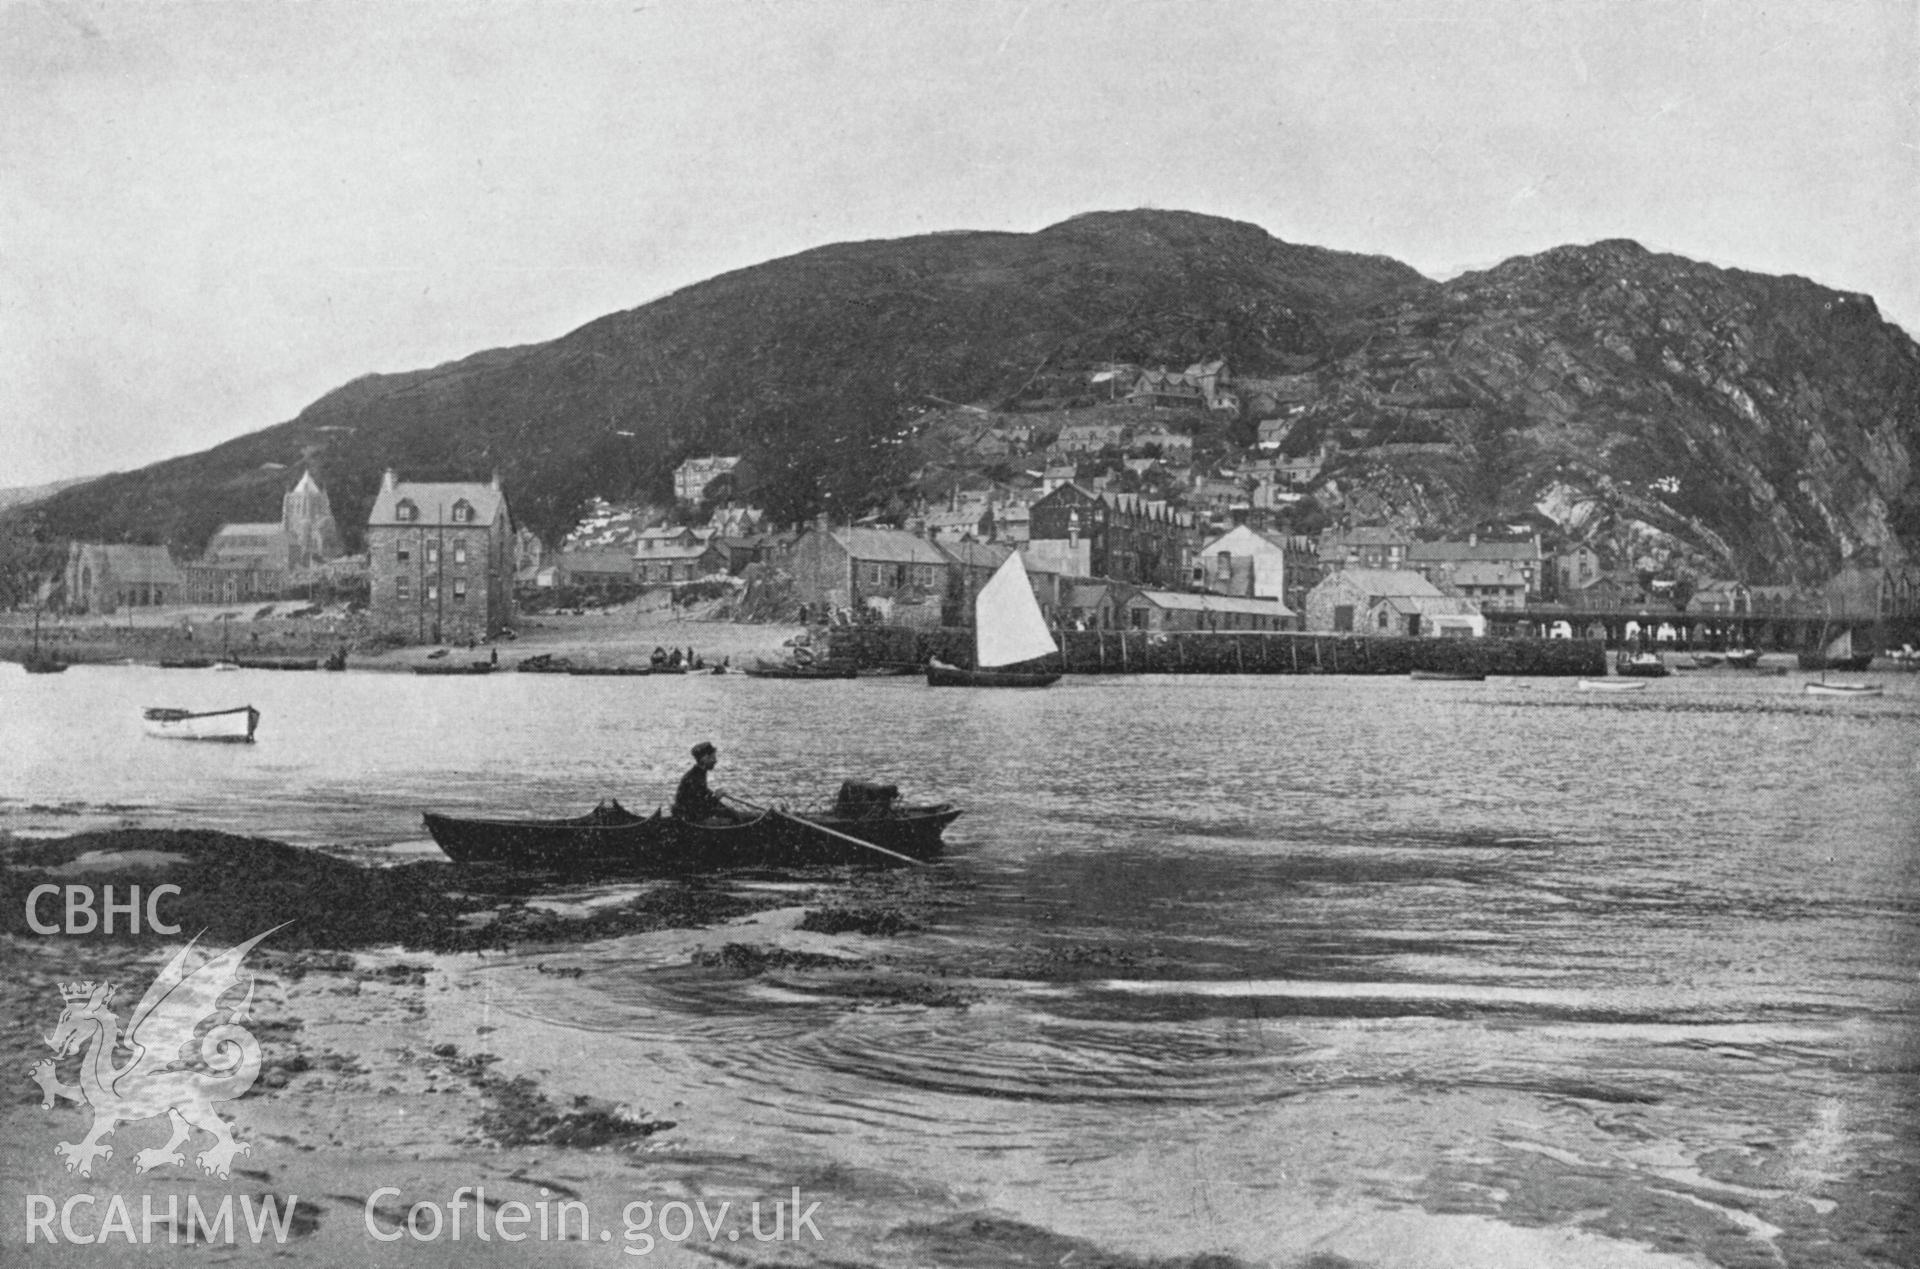 Digital copy of a view of Barmouth published 1902.